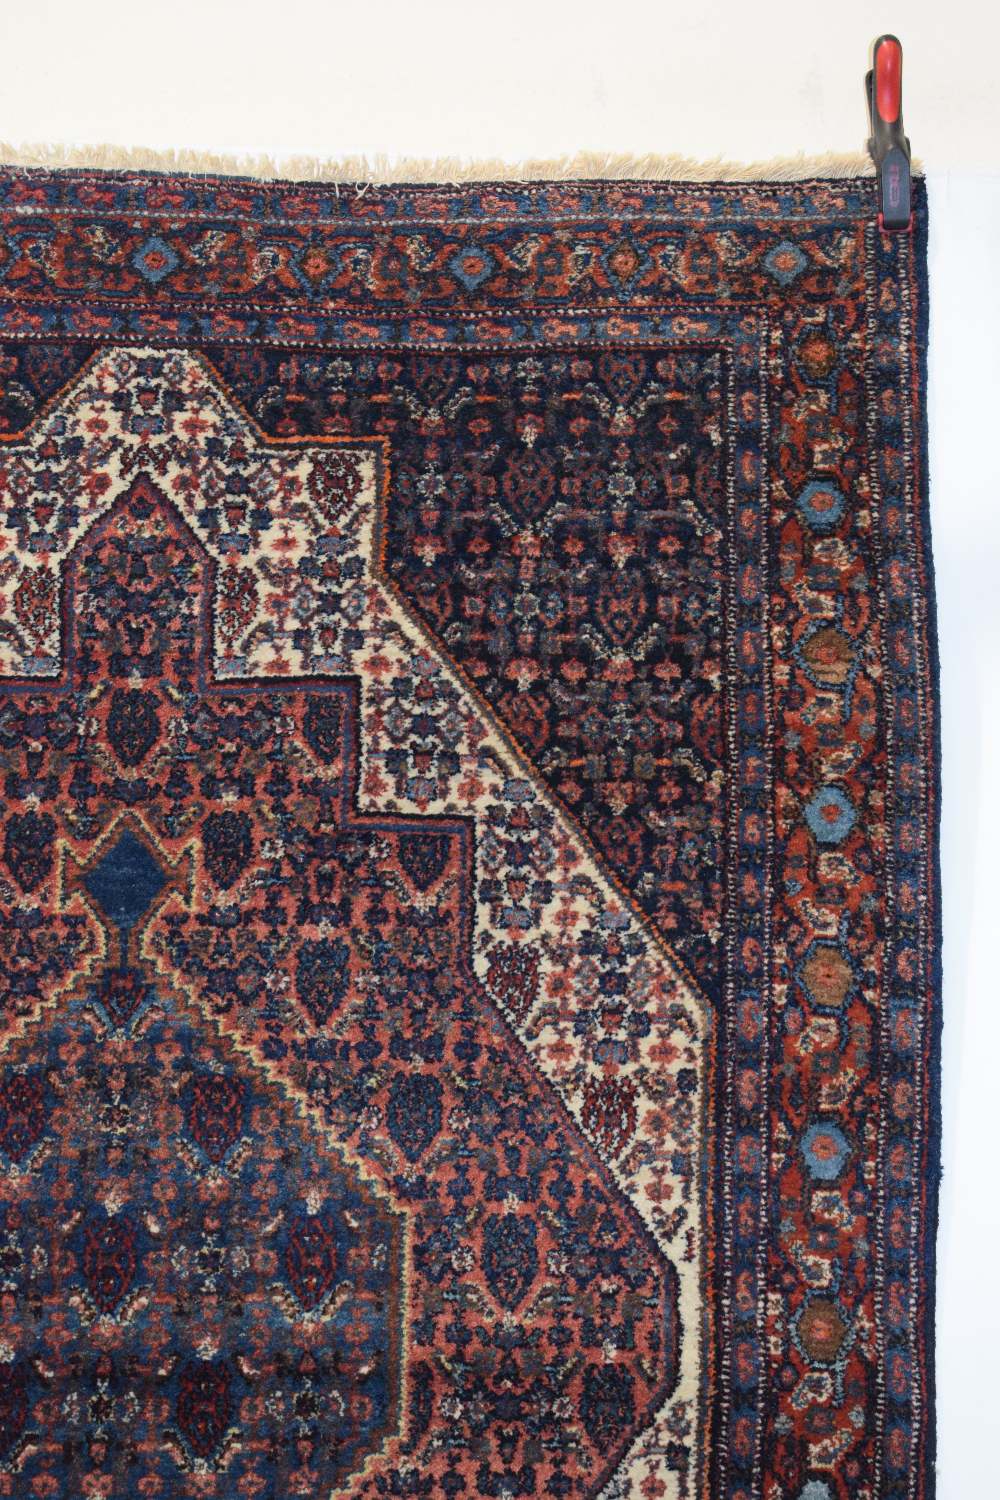 Senneh rug, Hamadan area, north west Persia, circa 1930s-40s, 6ft. 6in. X 4ft. 6in. 1.98m. X 1. - Image 3 of 10